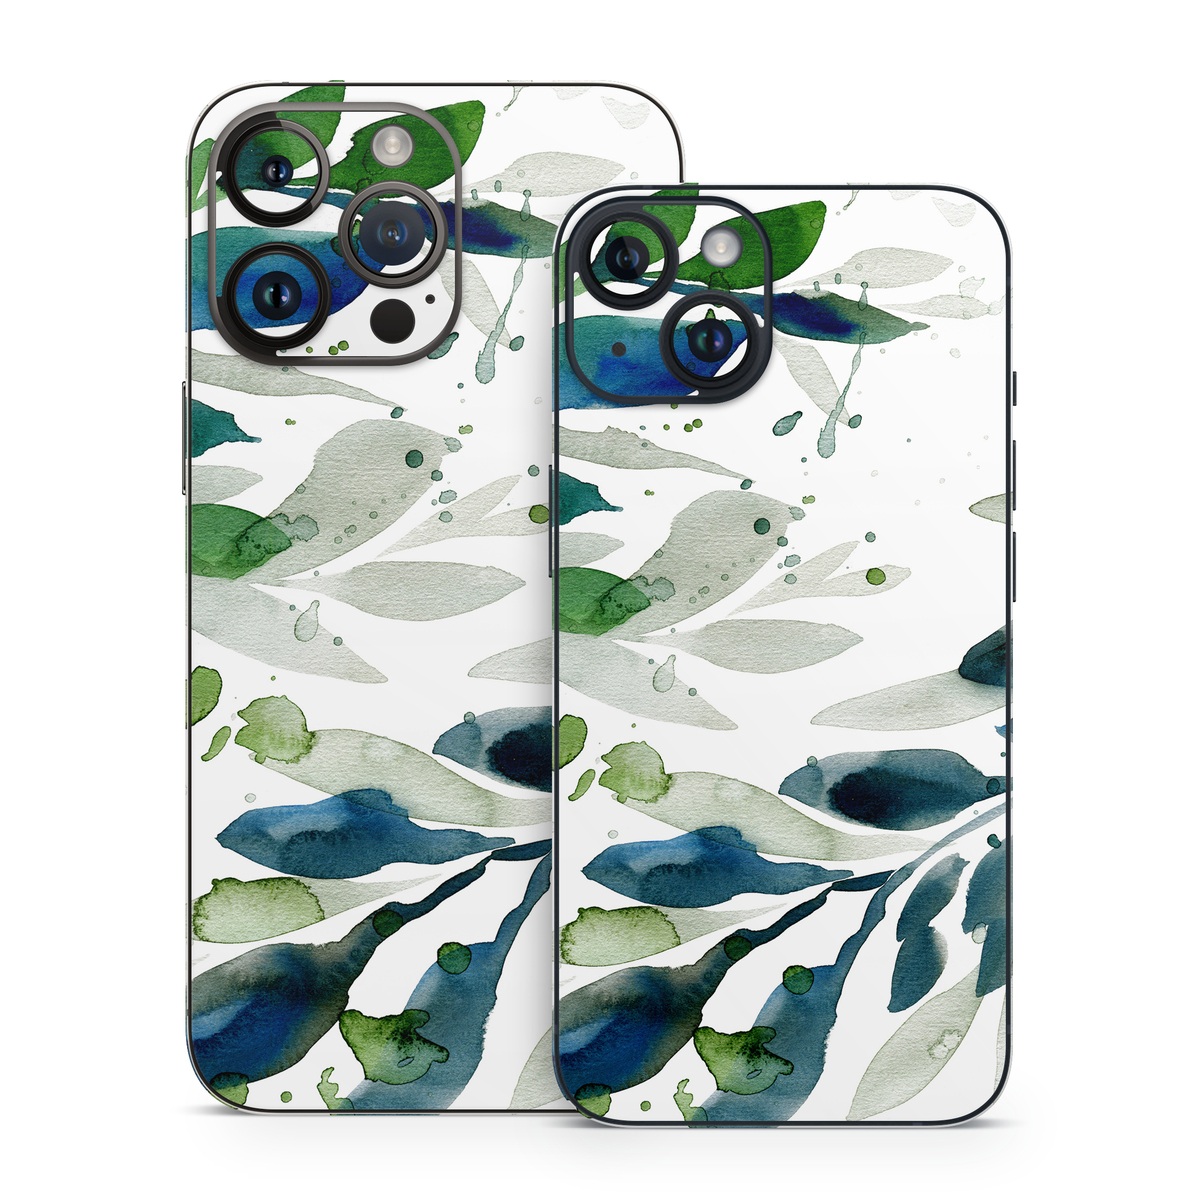 iPhone 14 Skin design of Leaf, Branch, Plant, Tree, Botany, Flower, Design, Eucalyptus, Pattern, Watercolor paint, with white, blue, green, gray colors